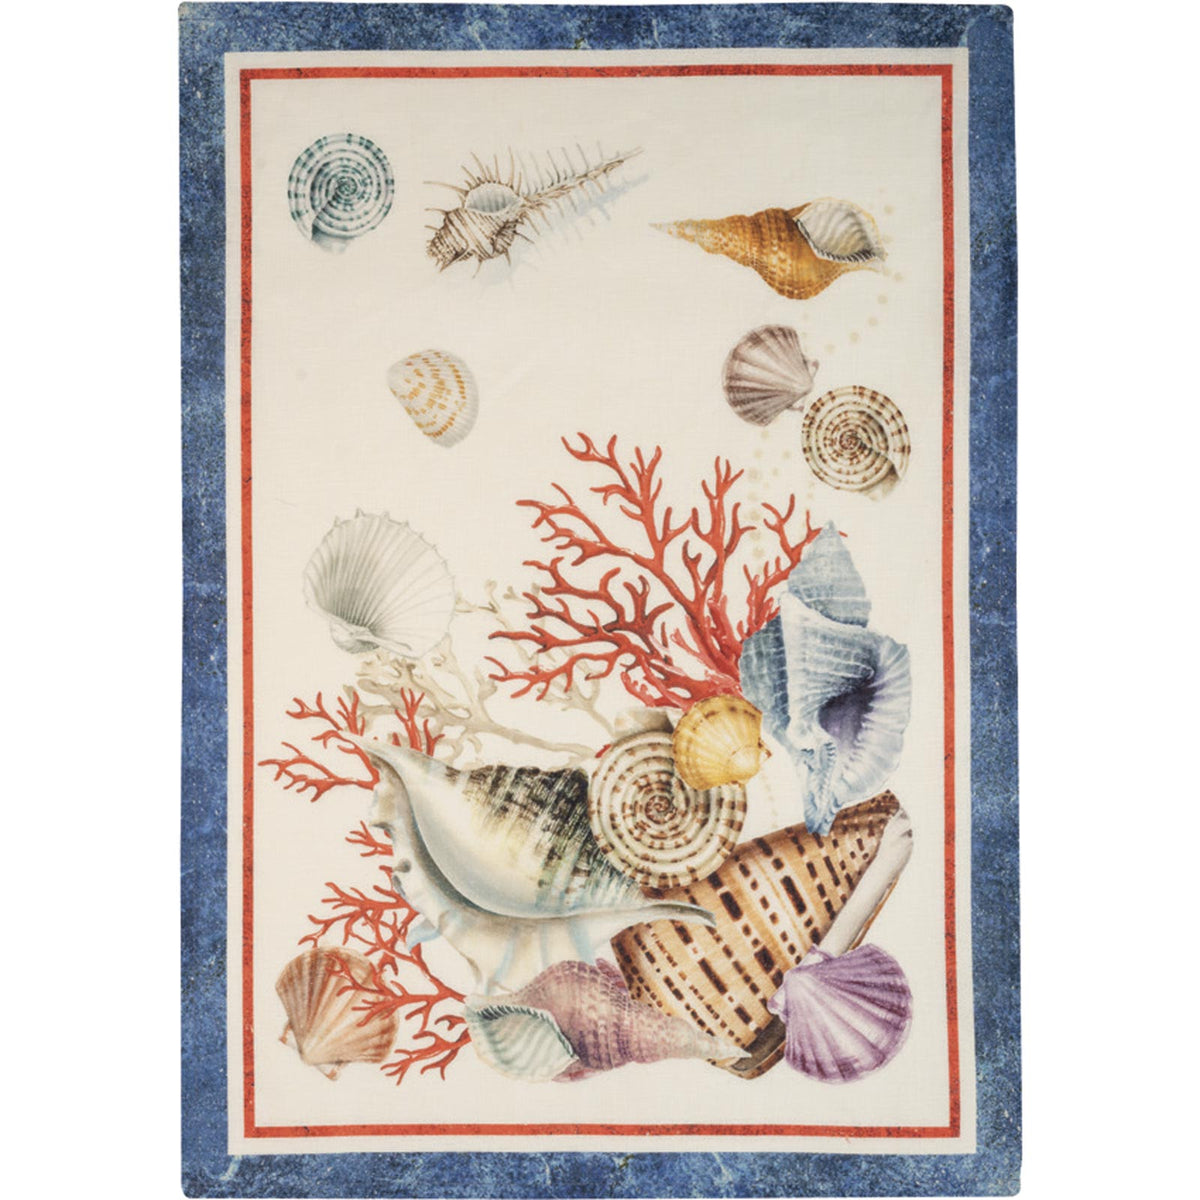 A Sanibel Linen Kitchen Towels Set/2 adorned with delicate sea shells and corals, perfect for shell collecting enthusiasts or anyone who appreciates a touch of coastal decor. (Brand Name: TTT)